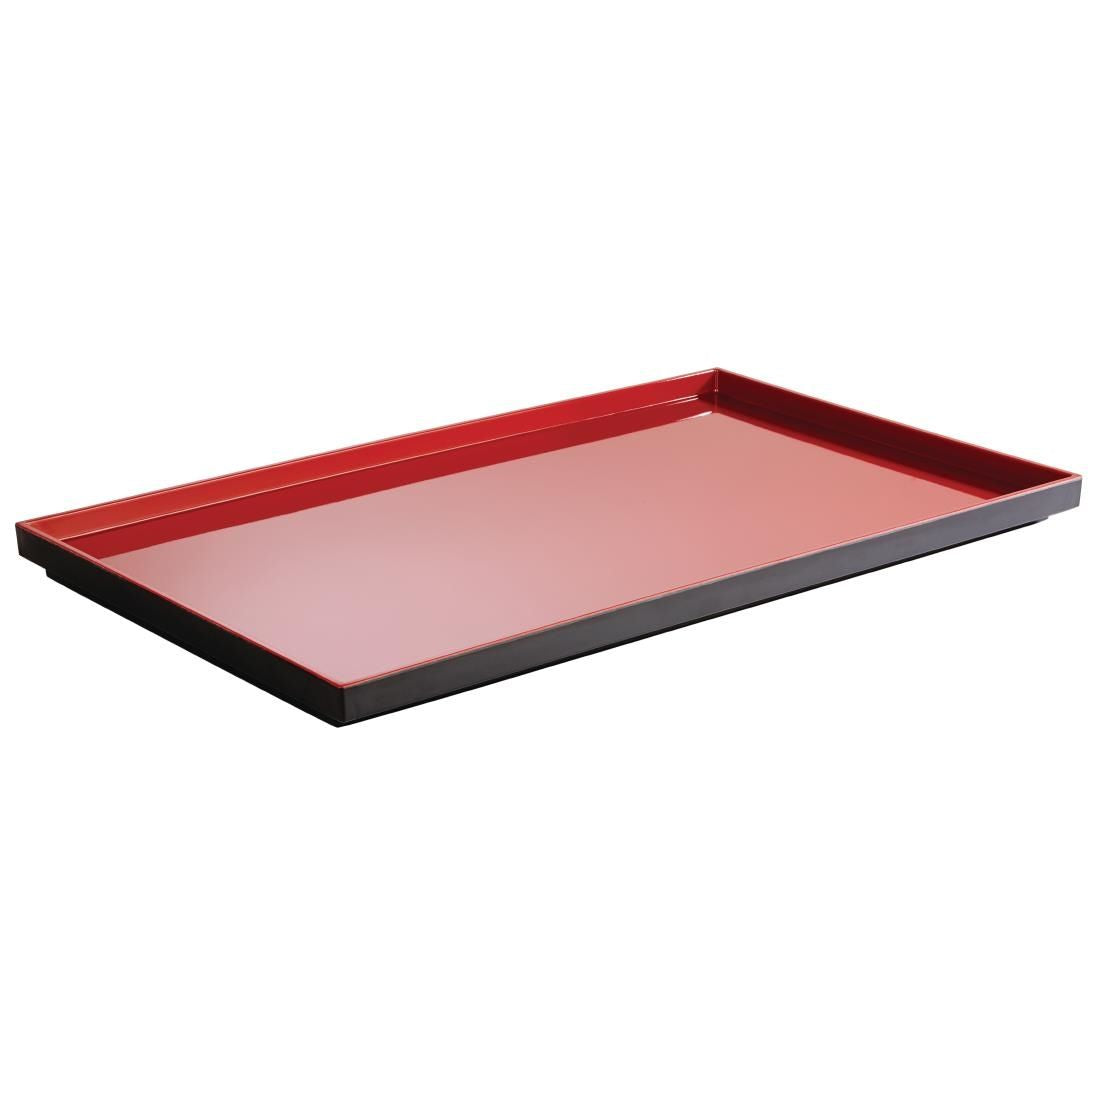 APS Asia+  Red Tray GN 1/1 JD Catering Equipment Solutions Ltd